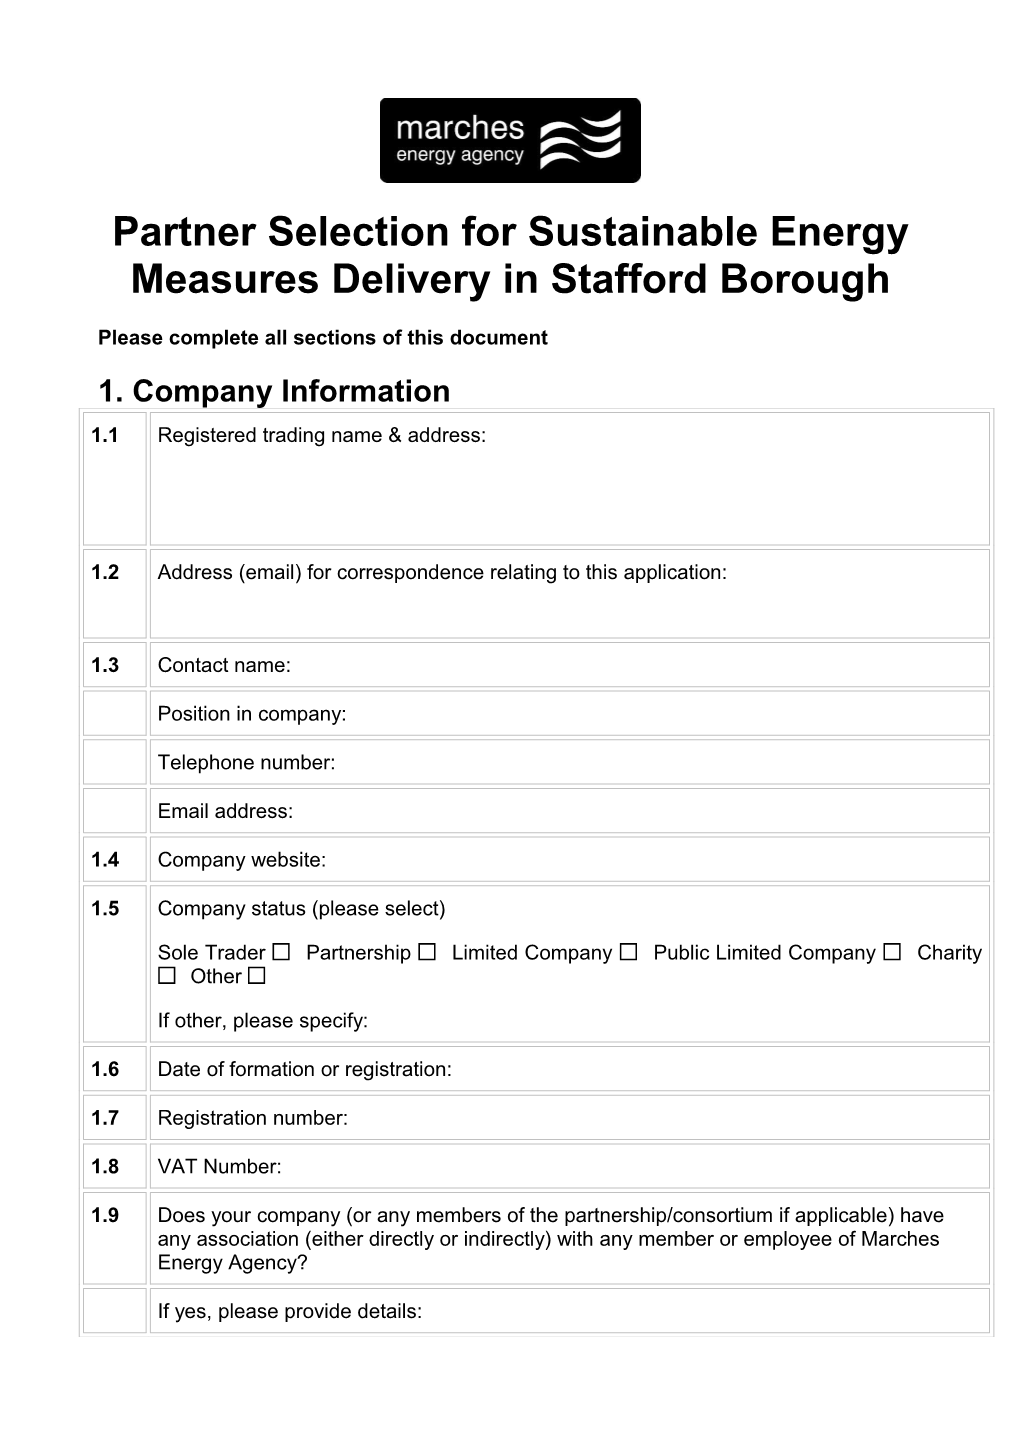 Partner Selection Forsustainable Energy Measures Delivery in Stafford Borough